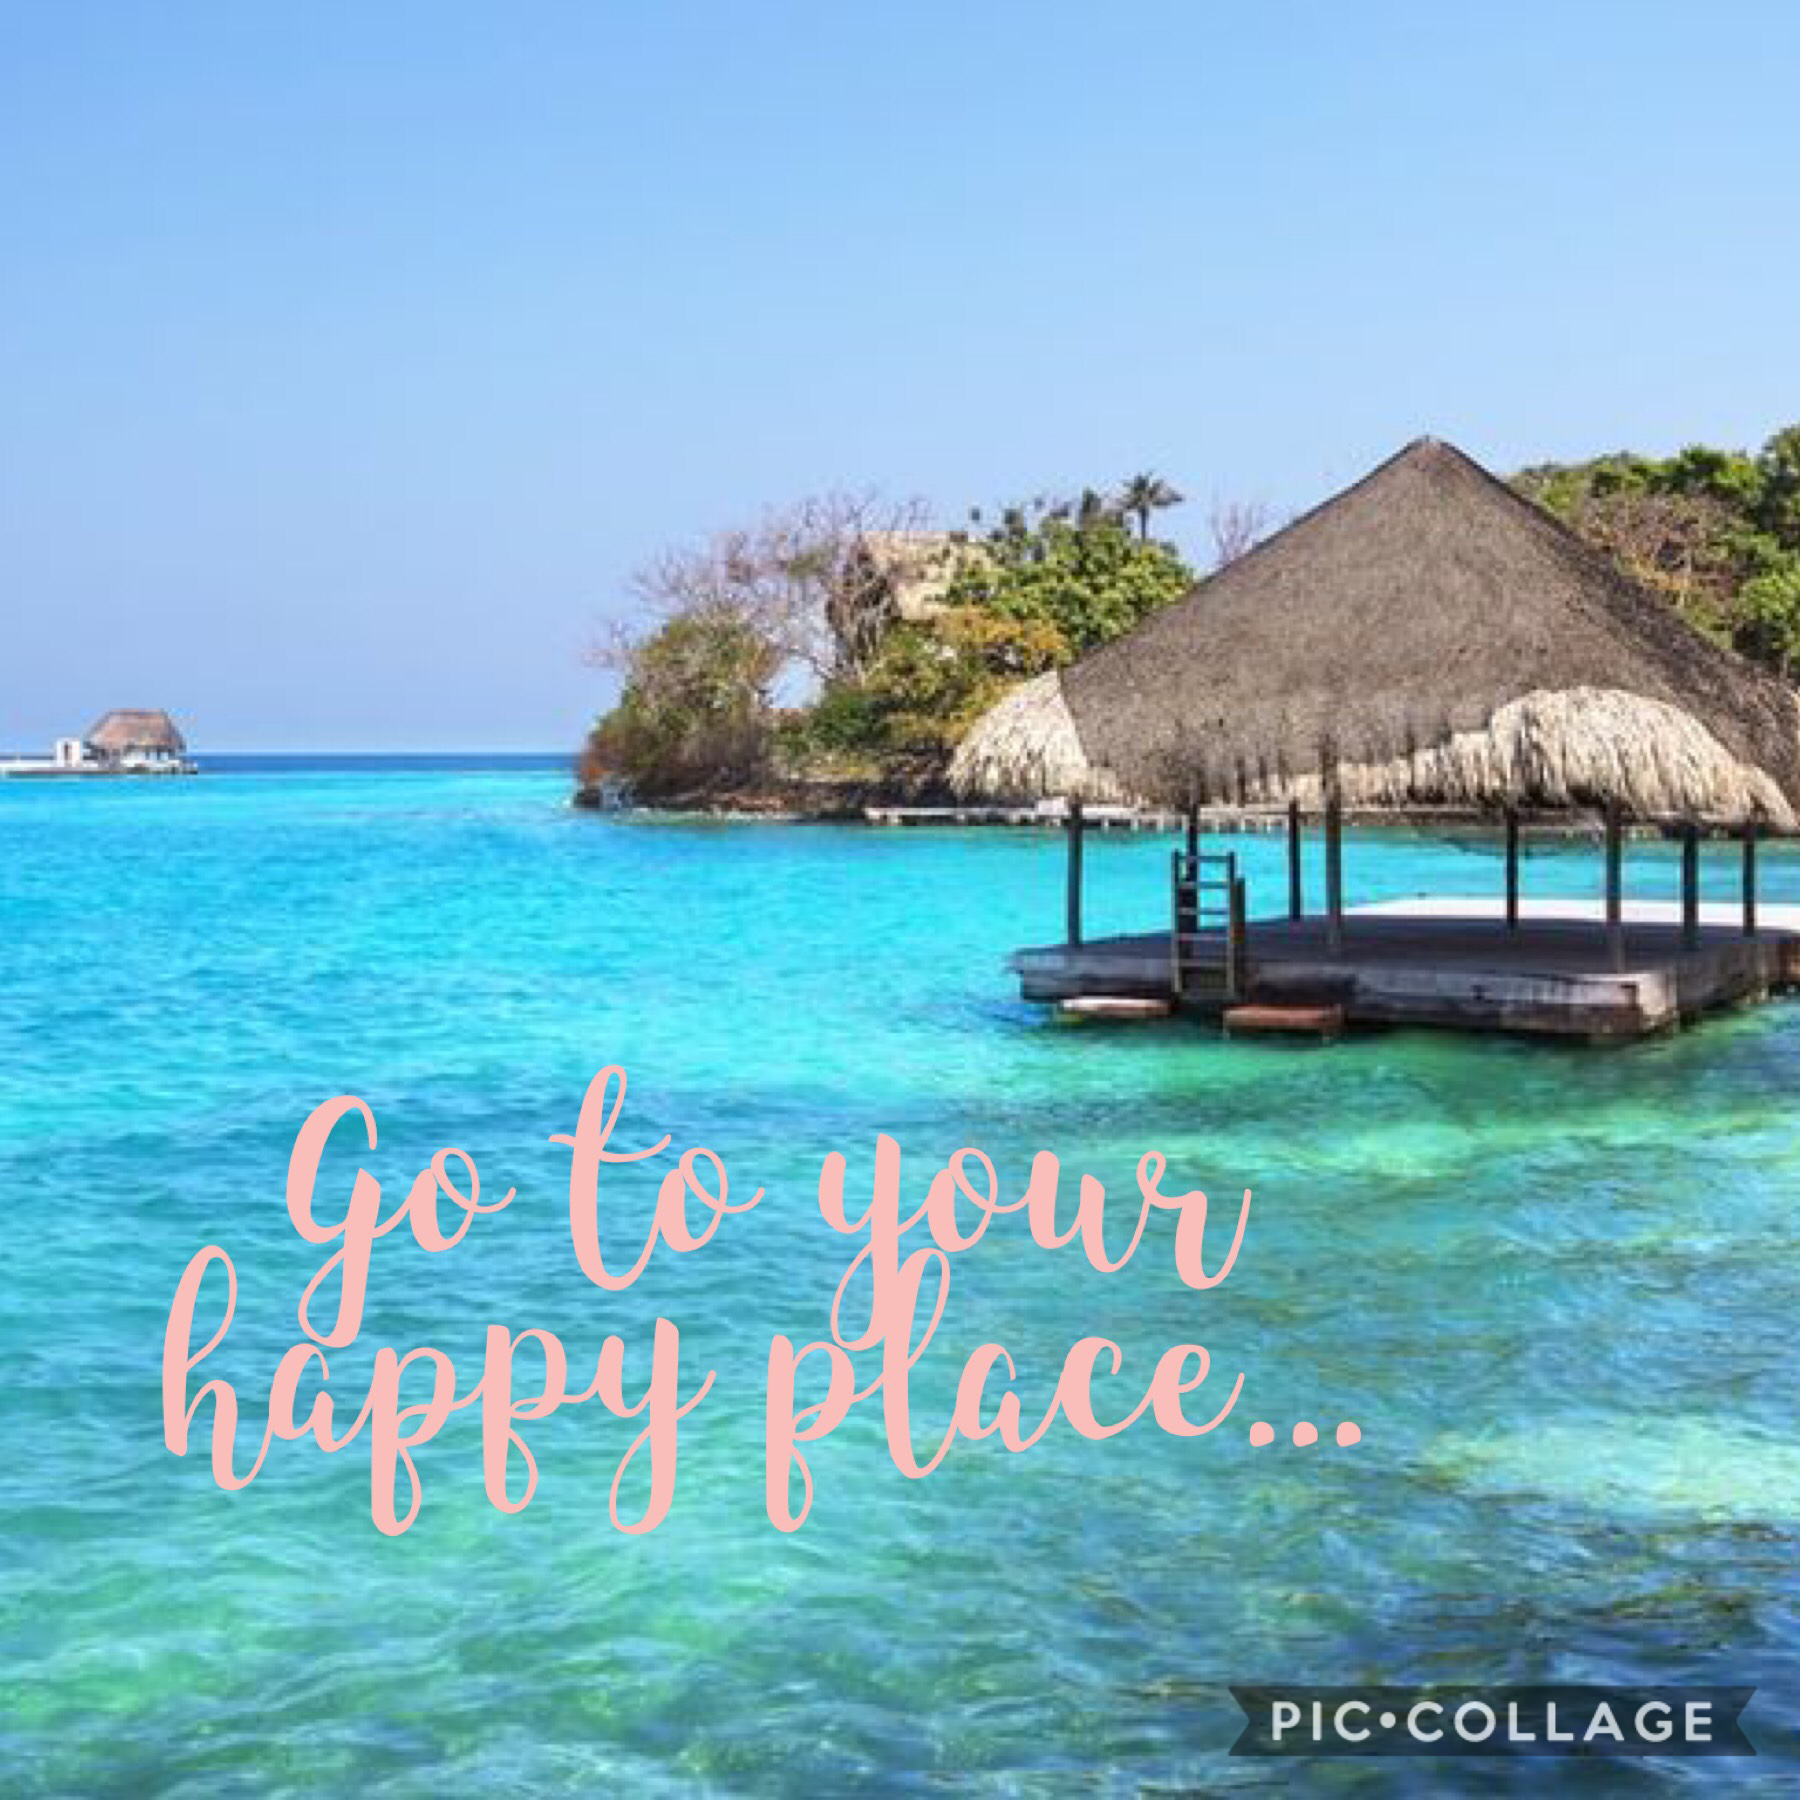 Where is your happy place? #CommentDownBelow